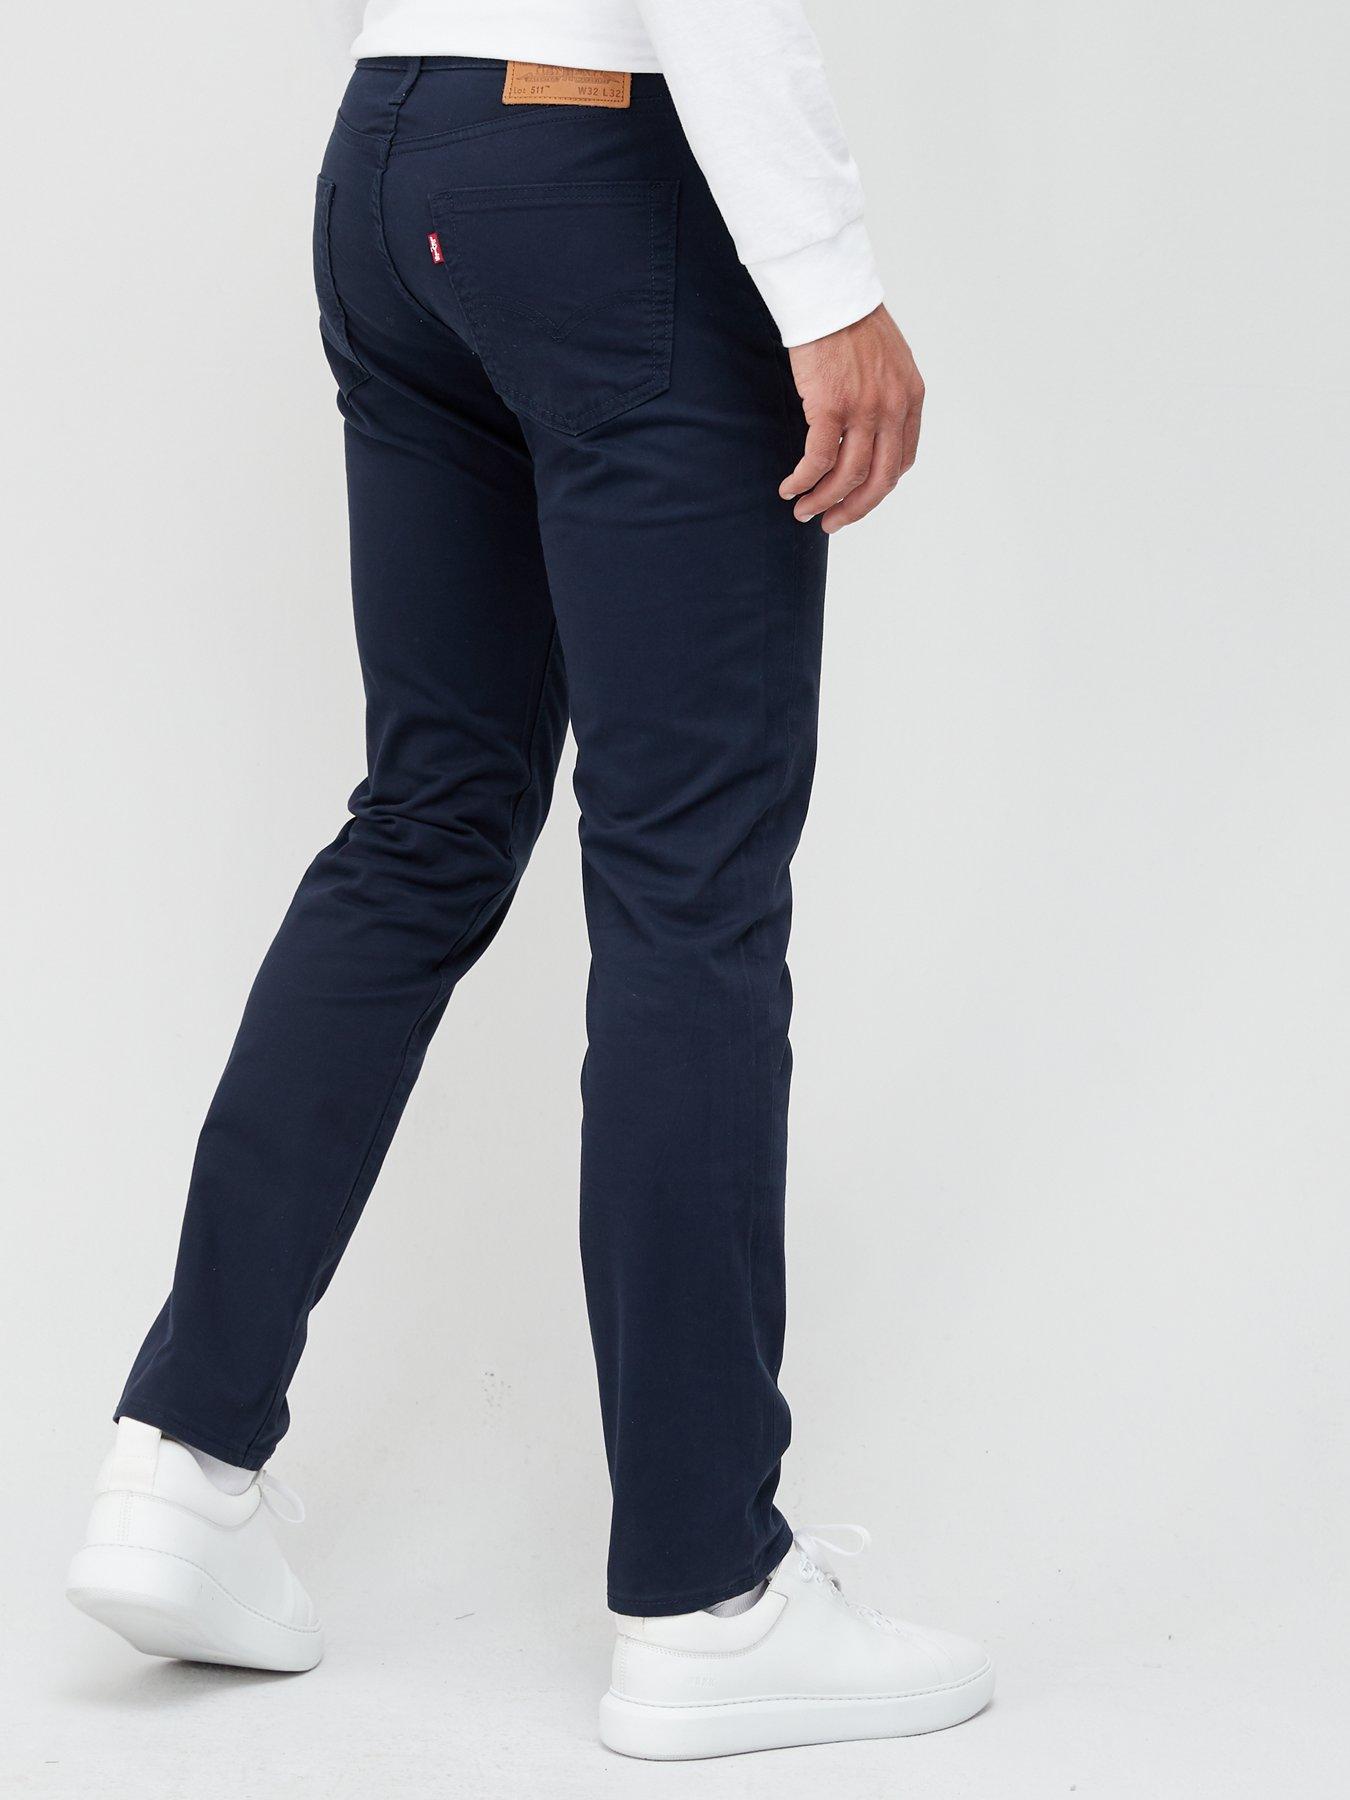 Levi's 511 Slim Fit Casual Trouser - Navy 